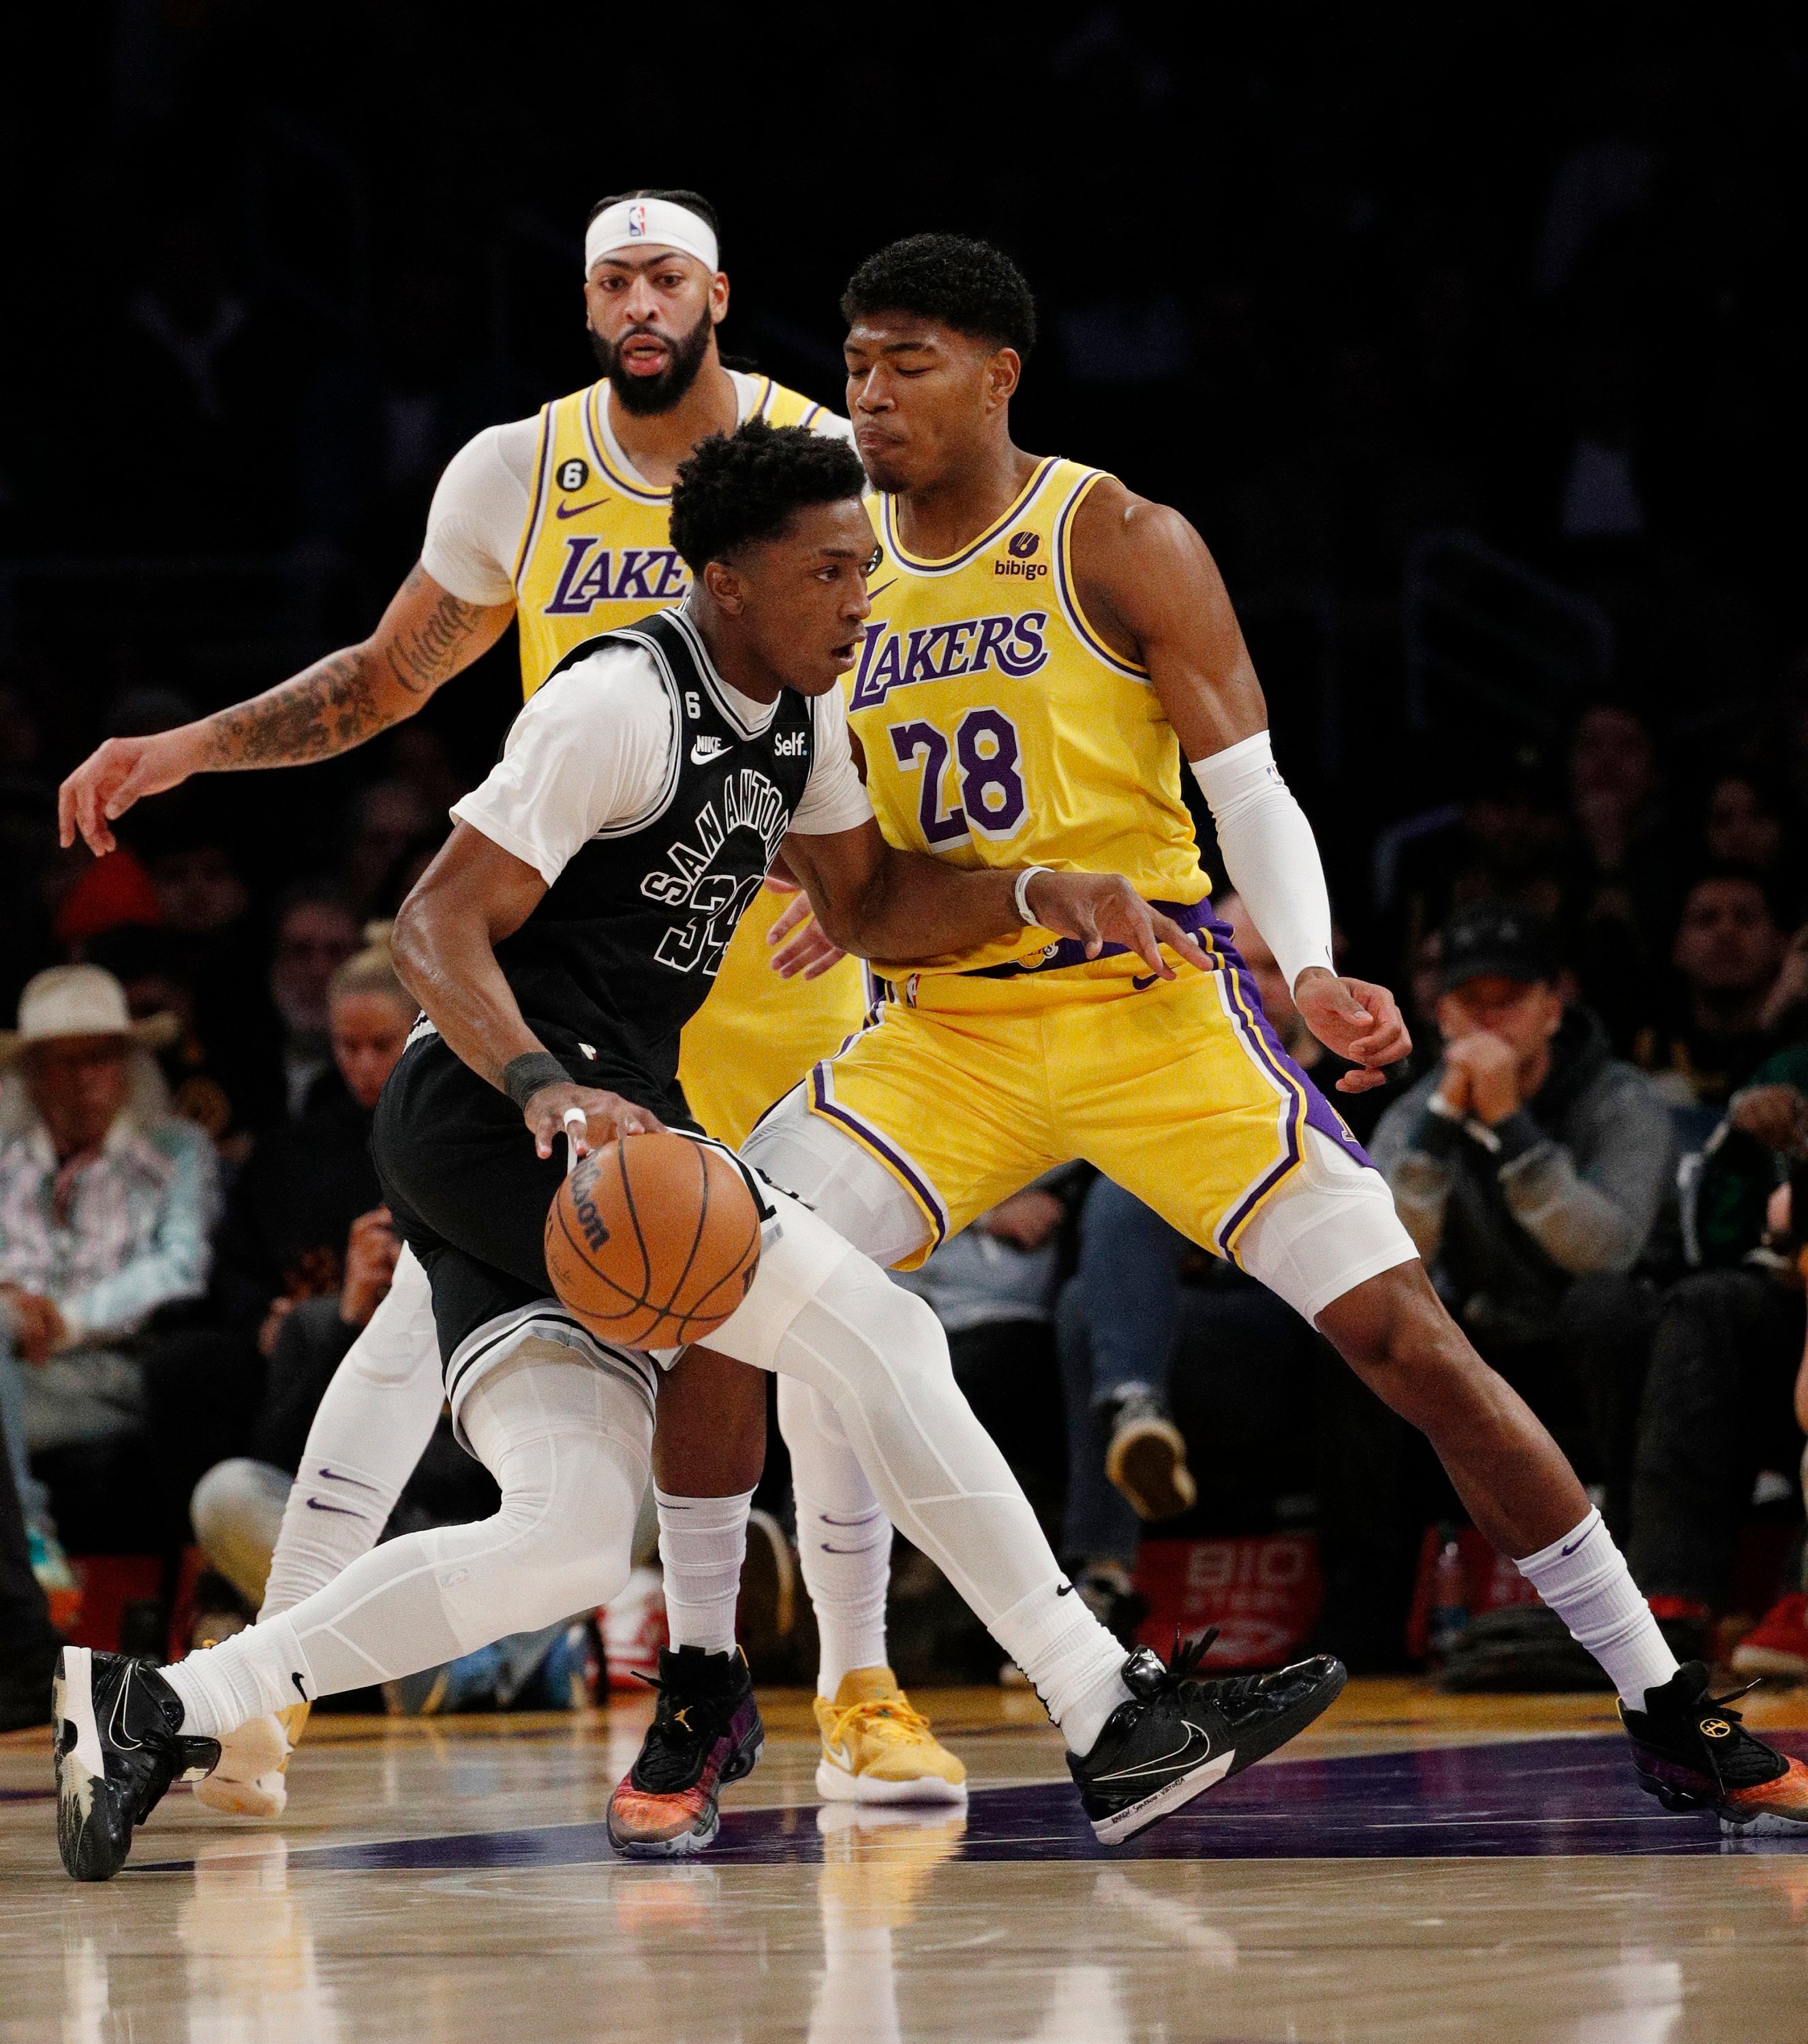 Rui Hachimura's Lakers swept in NBA Western Conference finals